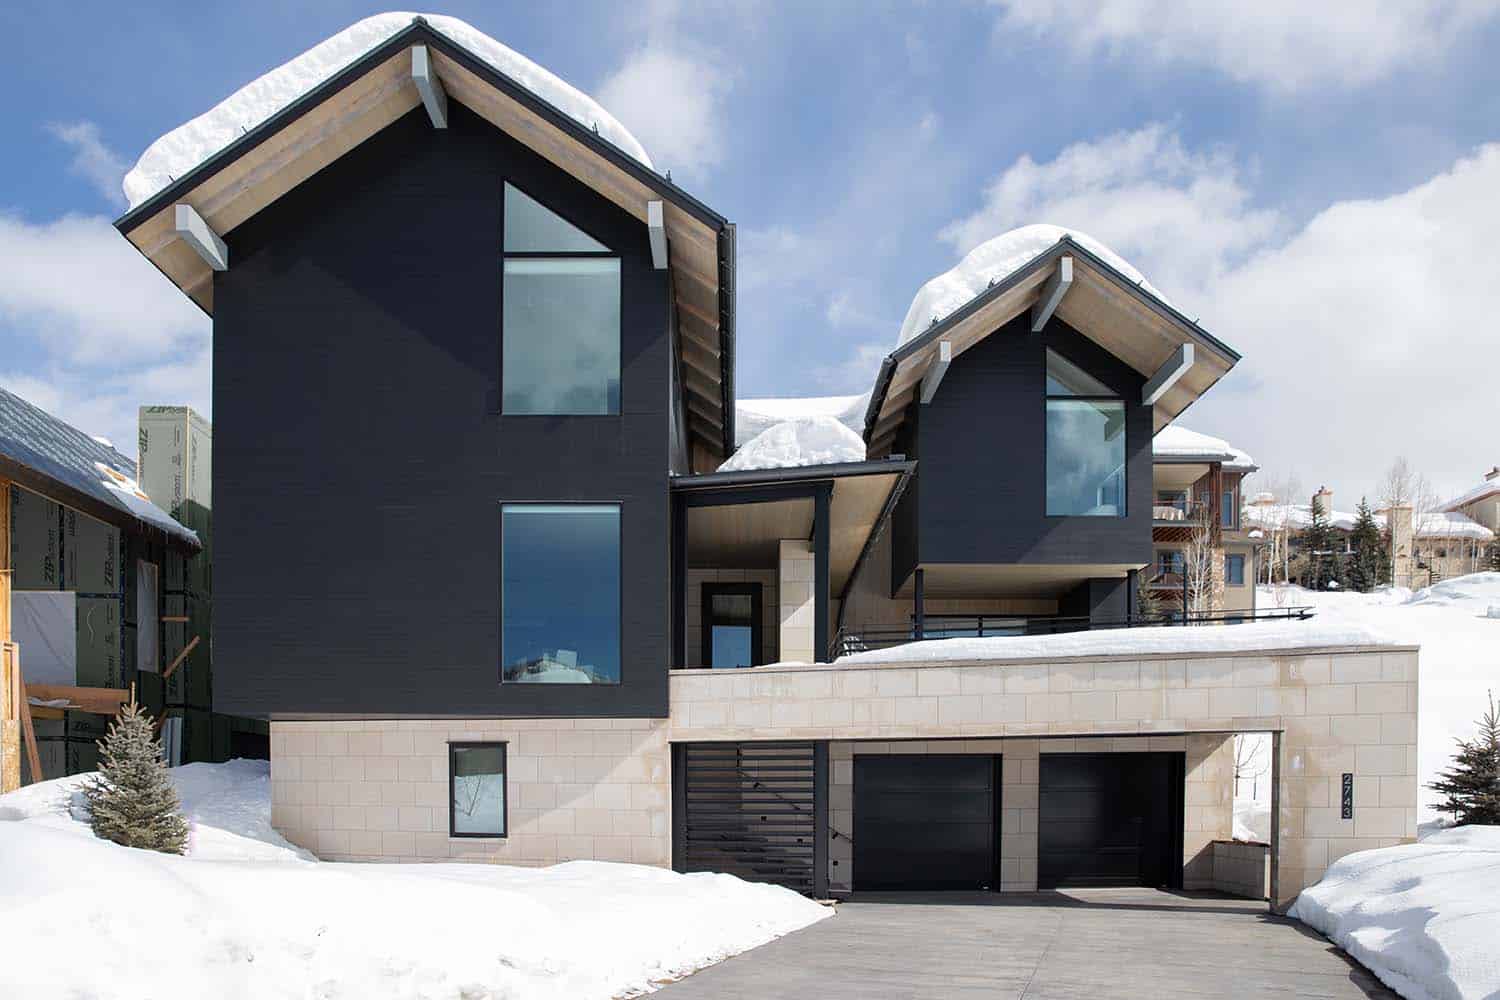 modern mountain lodge exterior with snow